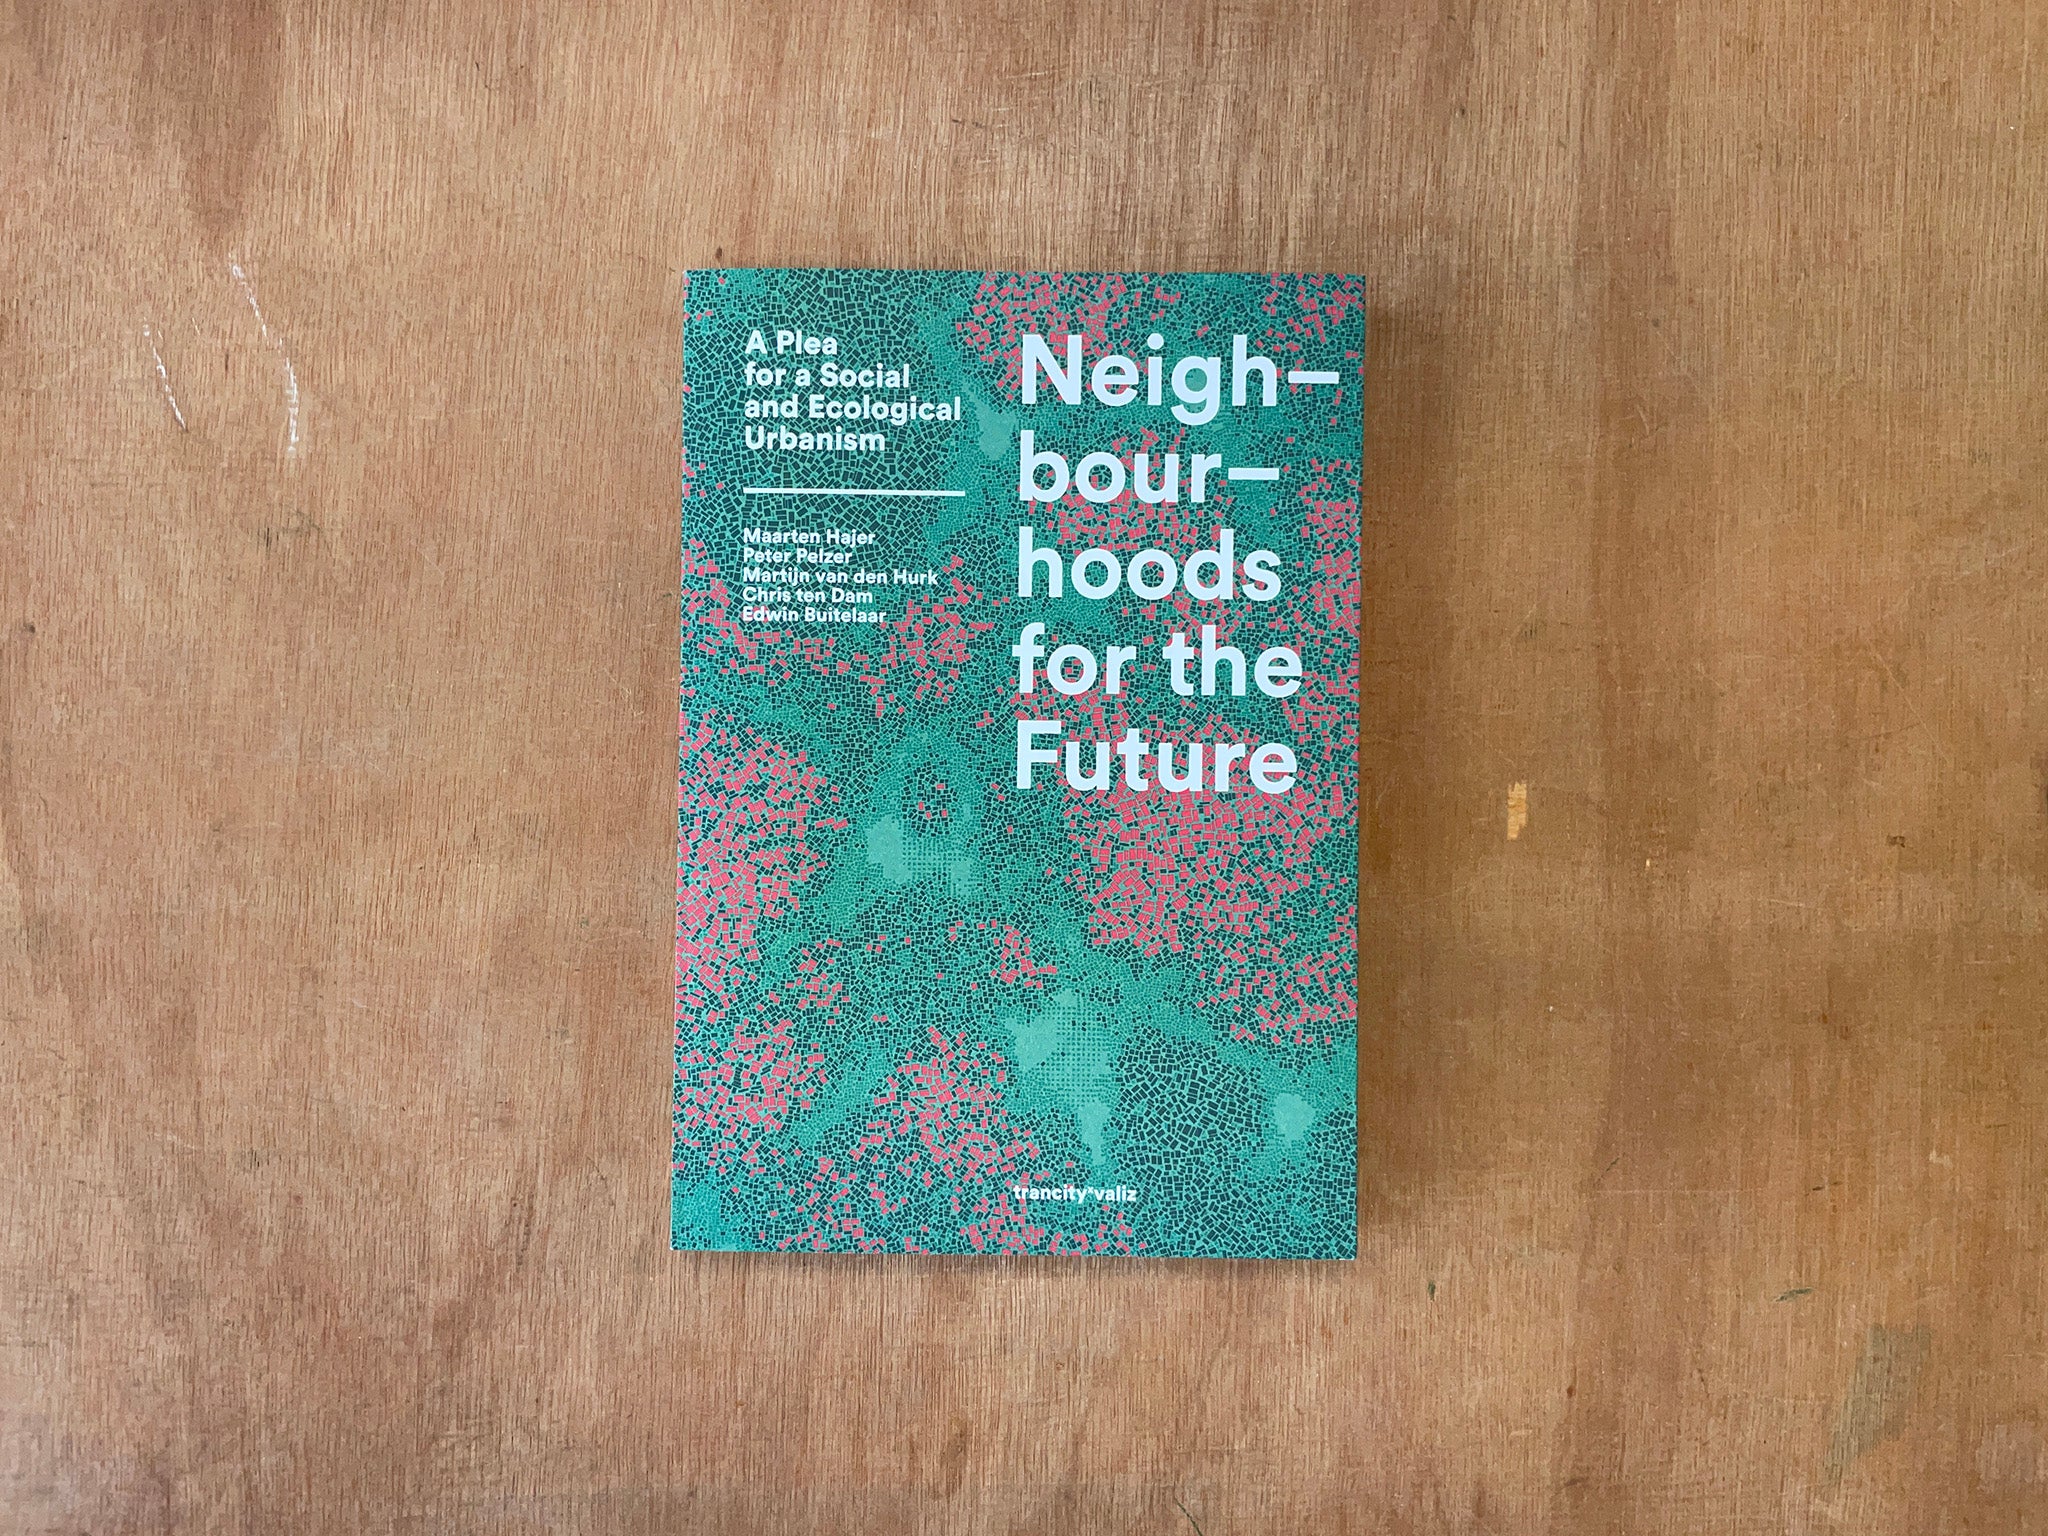 NEIGHBOURHOODS FOR THE FUTURE by Various Artists